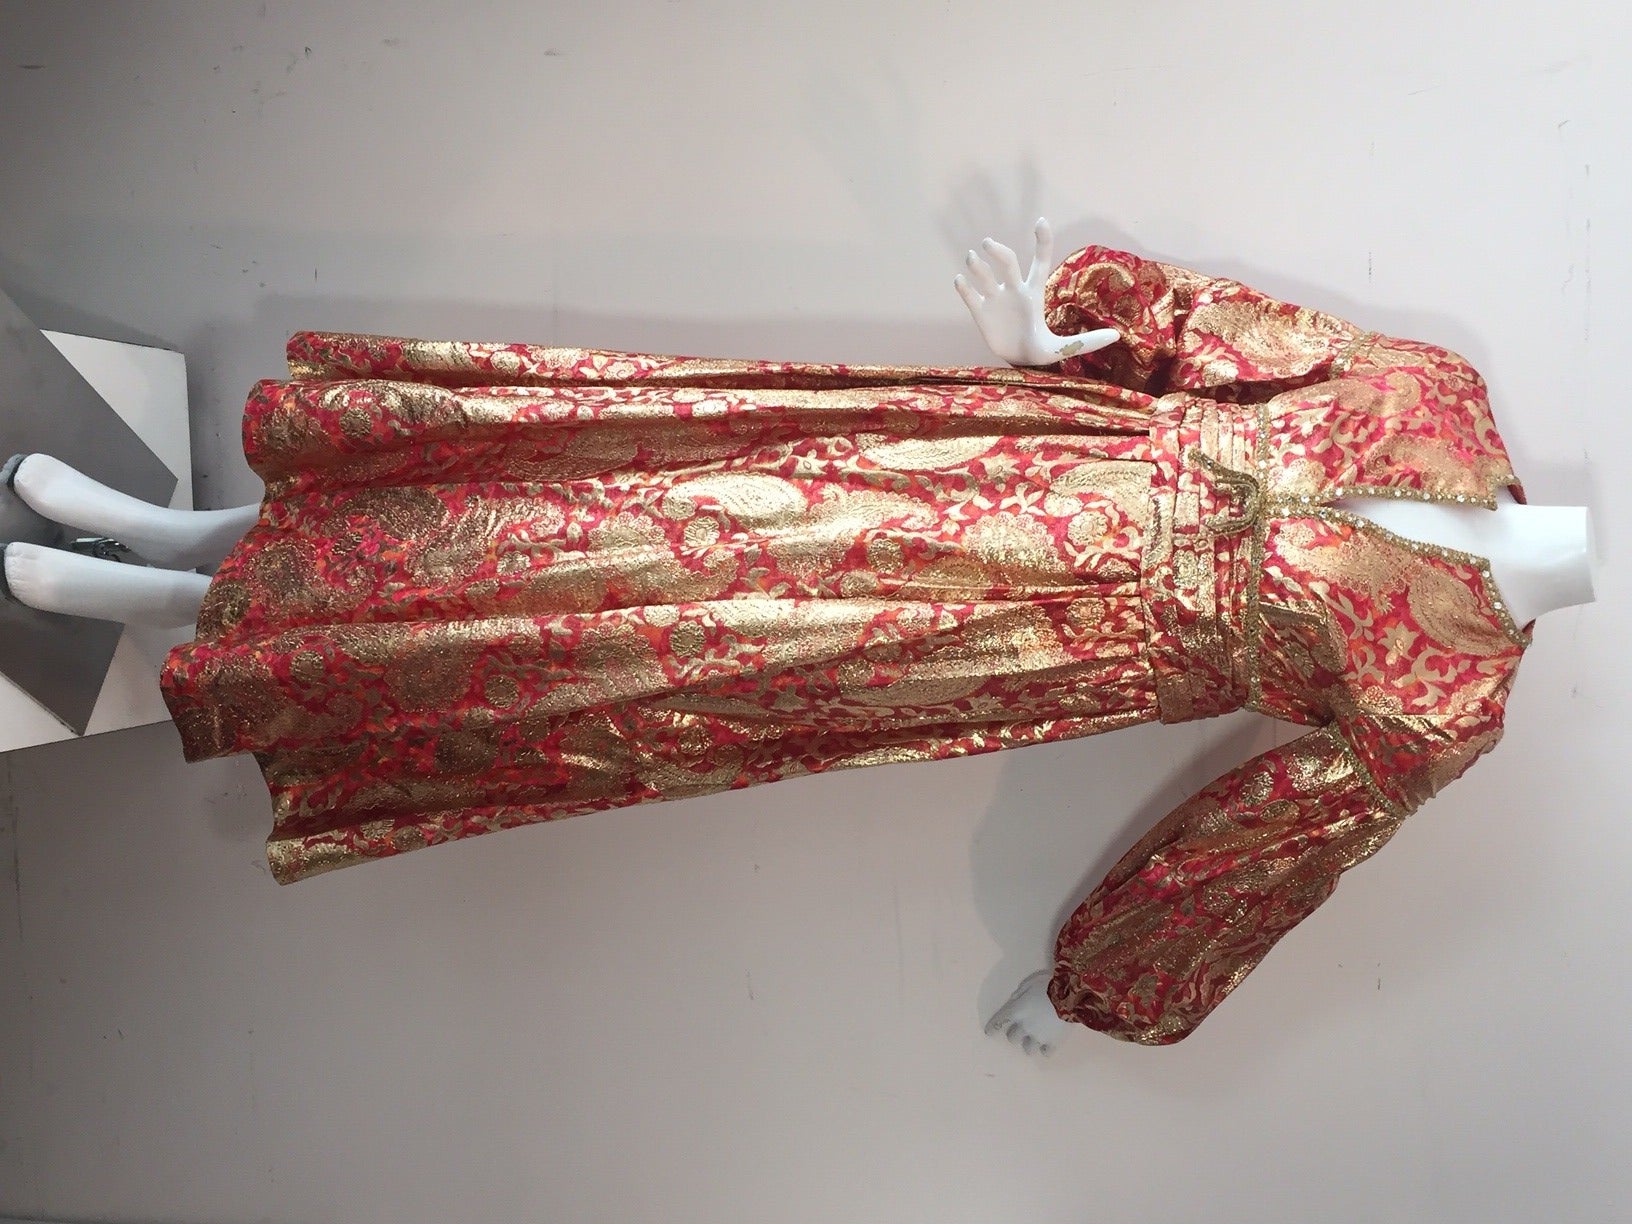 1960s Rizkallah for Malcolm Starr empire waist gown:  pomegranate, coral and gold paisley lame, pleated cummerbund under bust details, full ballooned sleeves and rows of lavish rhinestone trim at neckline, waist and sleeve. Fully lined, back zipper.